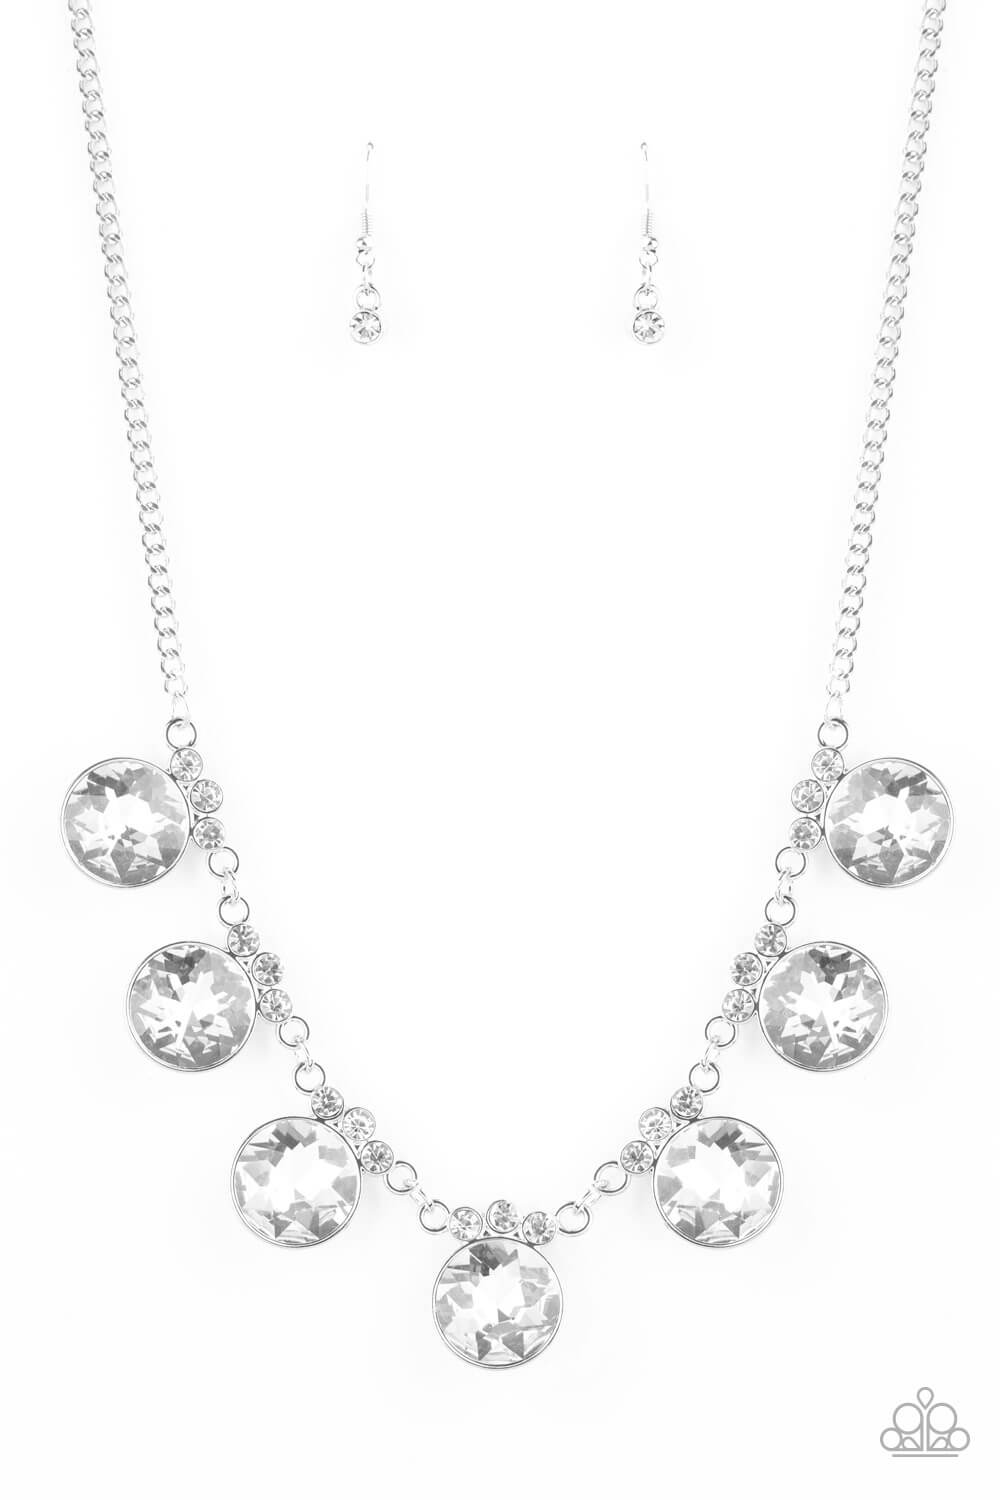 GLOW-Getter Glamour - White Necklace Set EXCLUSIVE 2020 CONVENTION ITEM - Princess Glam Shop